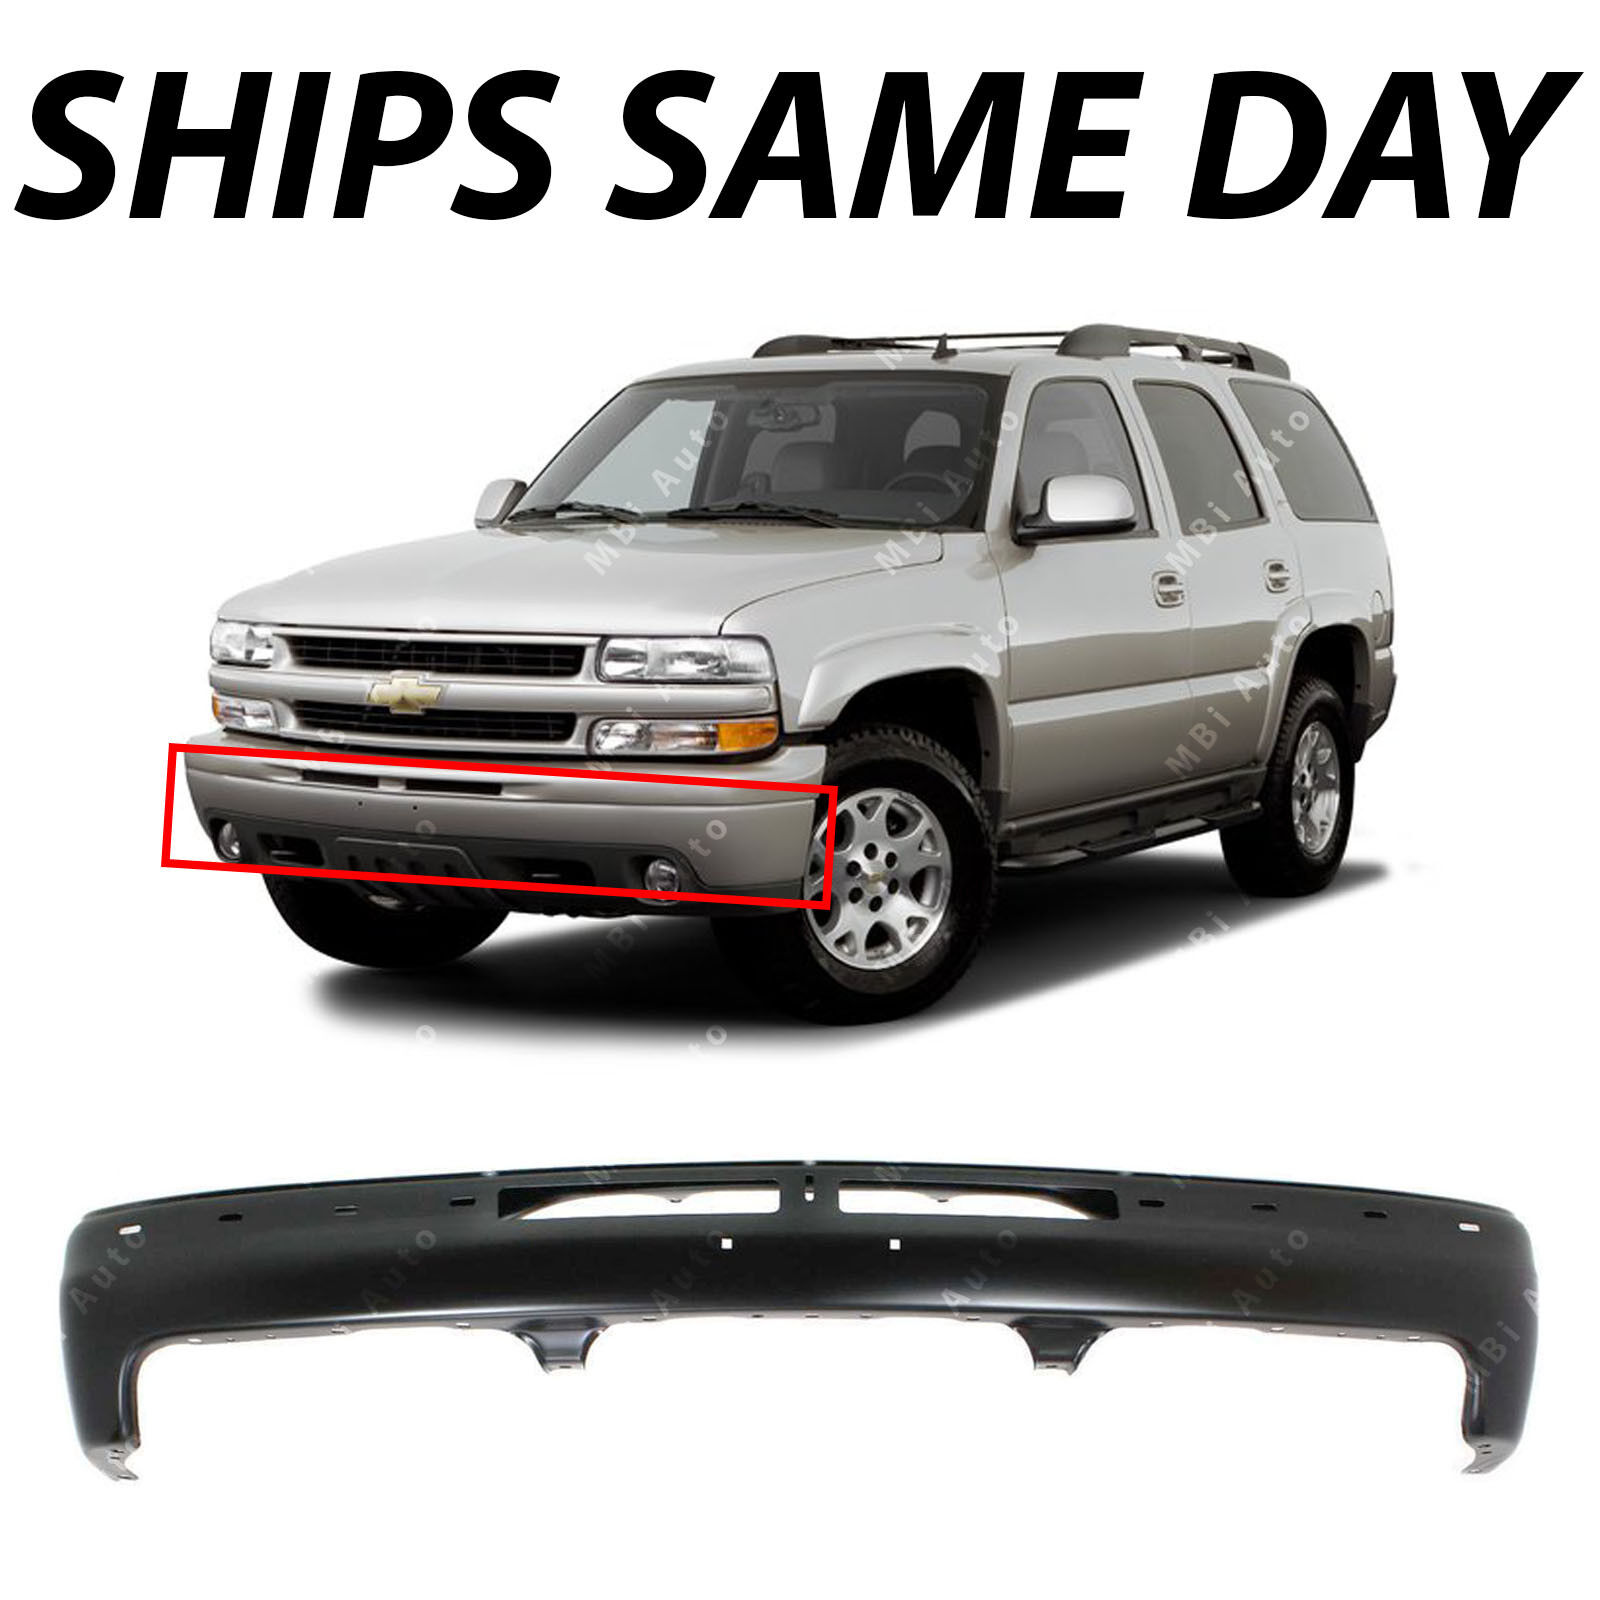 NEW Primered Steel Front Bumper Face Bar for 2000-2006 Suburban Tahoe